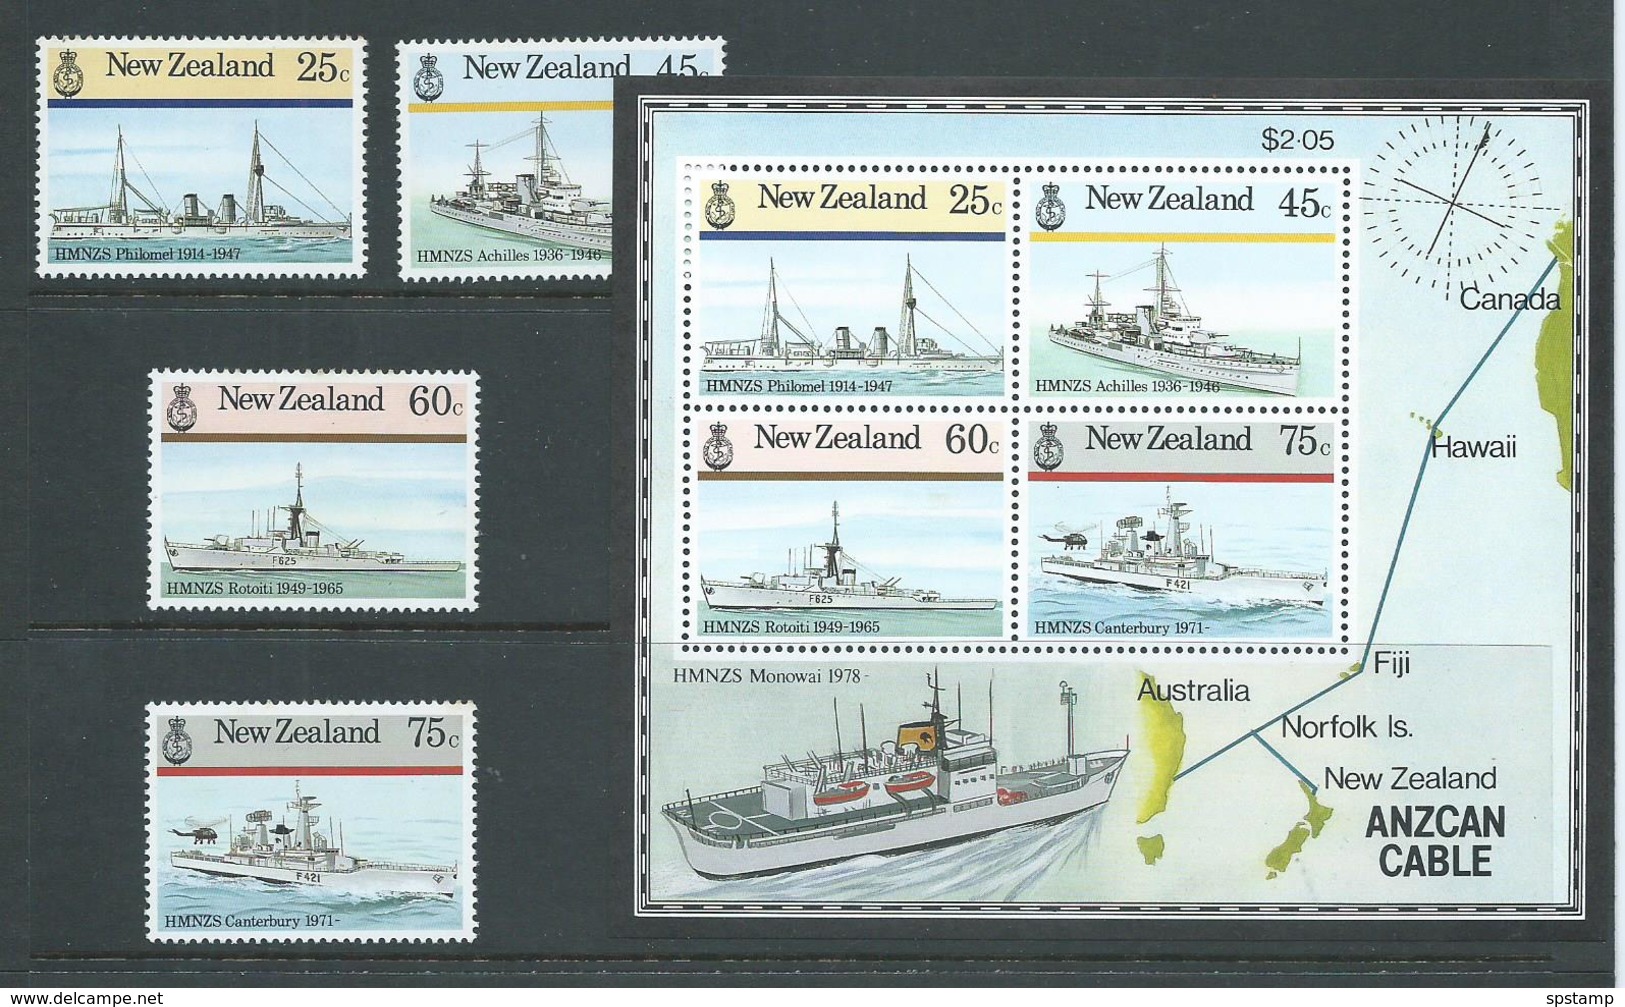 New Zealand 1985 Naval Ships Set 4 & Anzcan Cable Miniature Sheet MNH - Unused Stamps